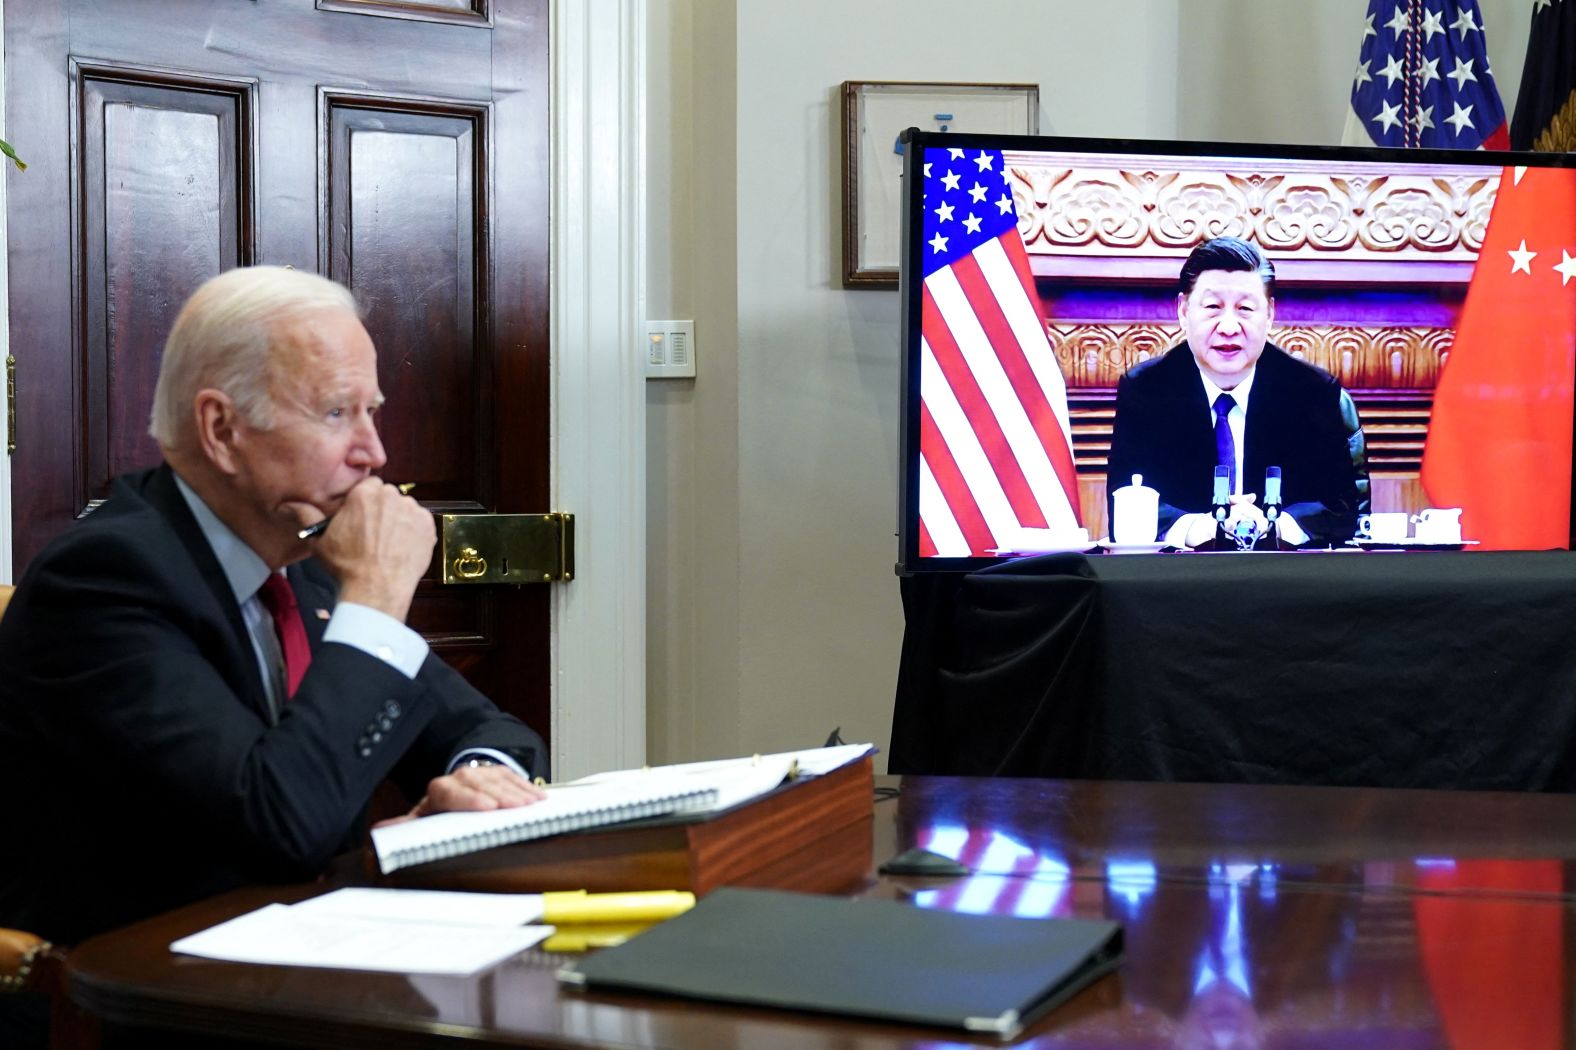 Xi meets with US President Joe Biden during a <a href="index.php?page=&url=https%3A%2F%2Fwww.cnn.com%2F2021%2F11%2F15%2Fpolitics%2Fjoe-biden-xi-jinping-virtual-summit%2Findex.html" target="_blank">virtual summit</a> in November 2021. Officials said the three-and-a-half hour meeting, which stretched longer than planned, allowed the two men ample opportunity to diverge from their prepared talking points.